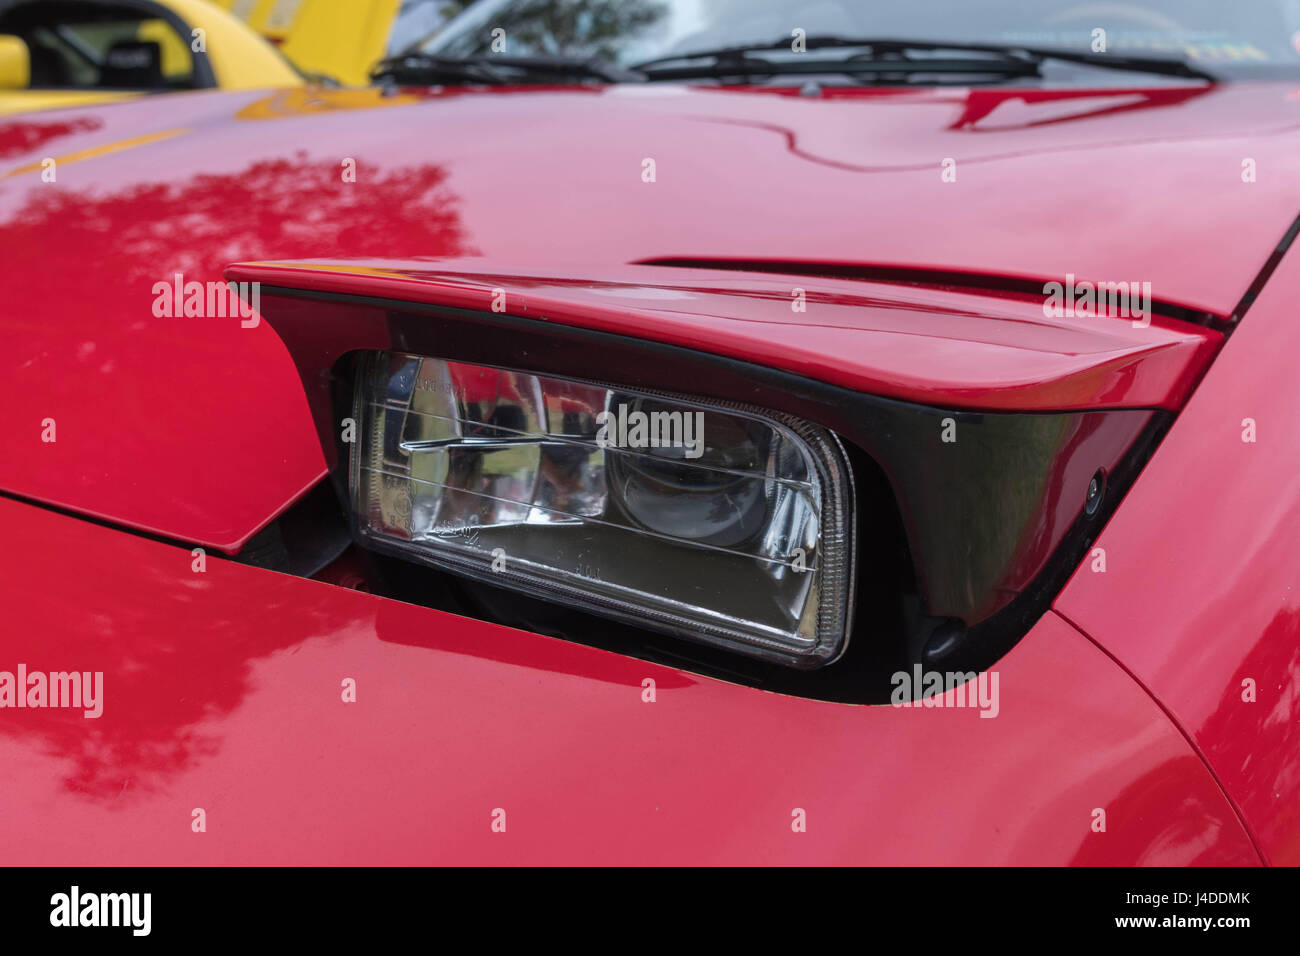 Toyota Mr2 High Resolution Stock Photography and Images - Alamy